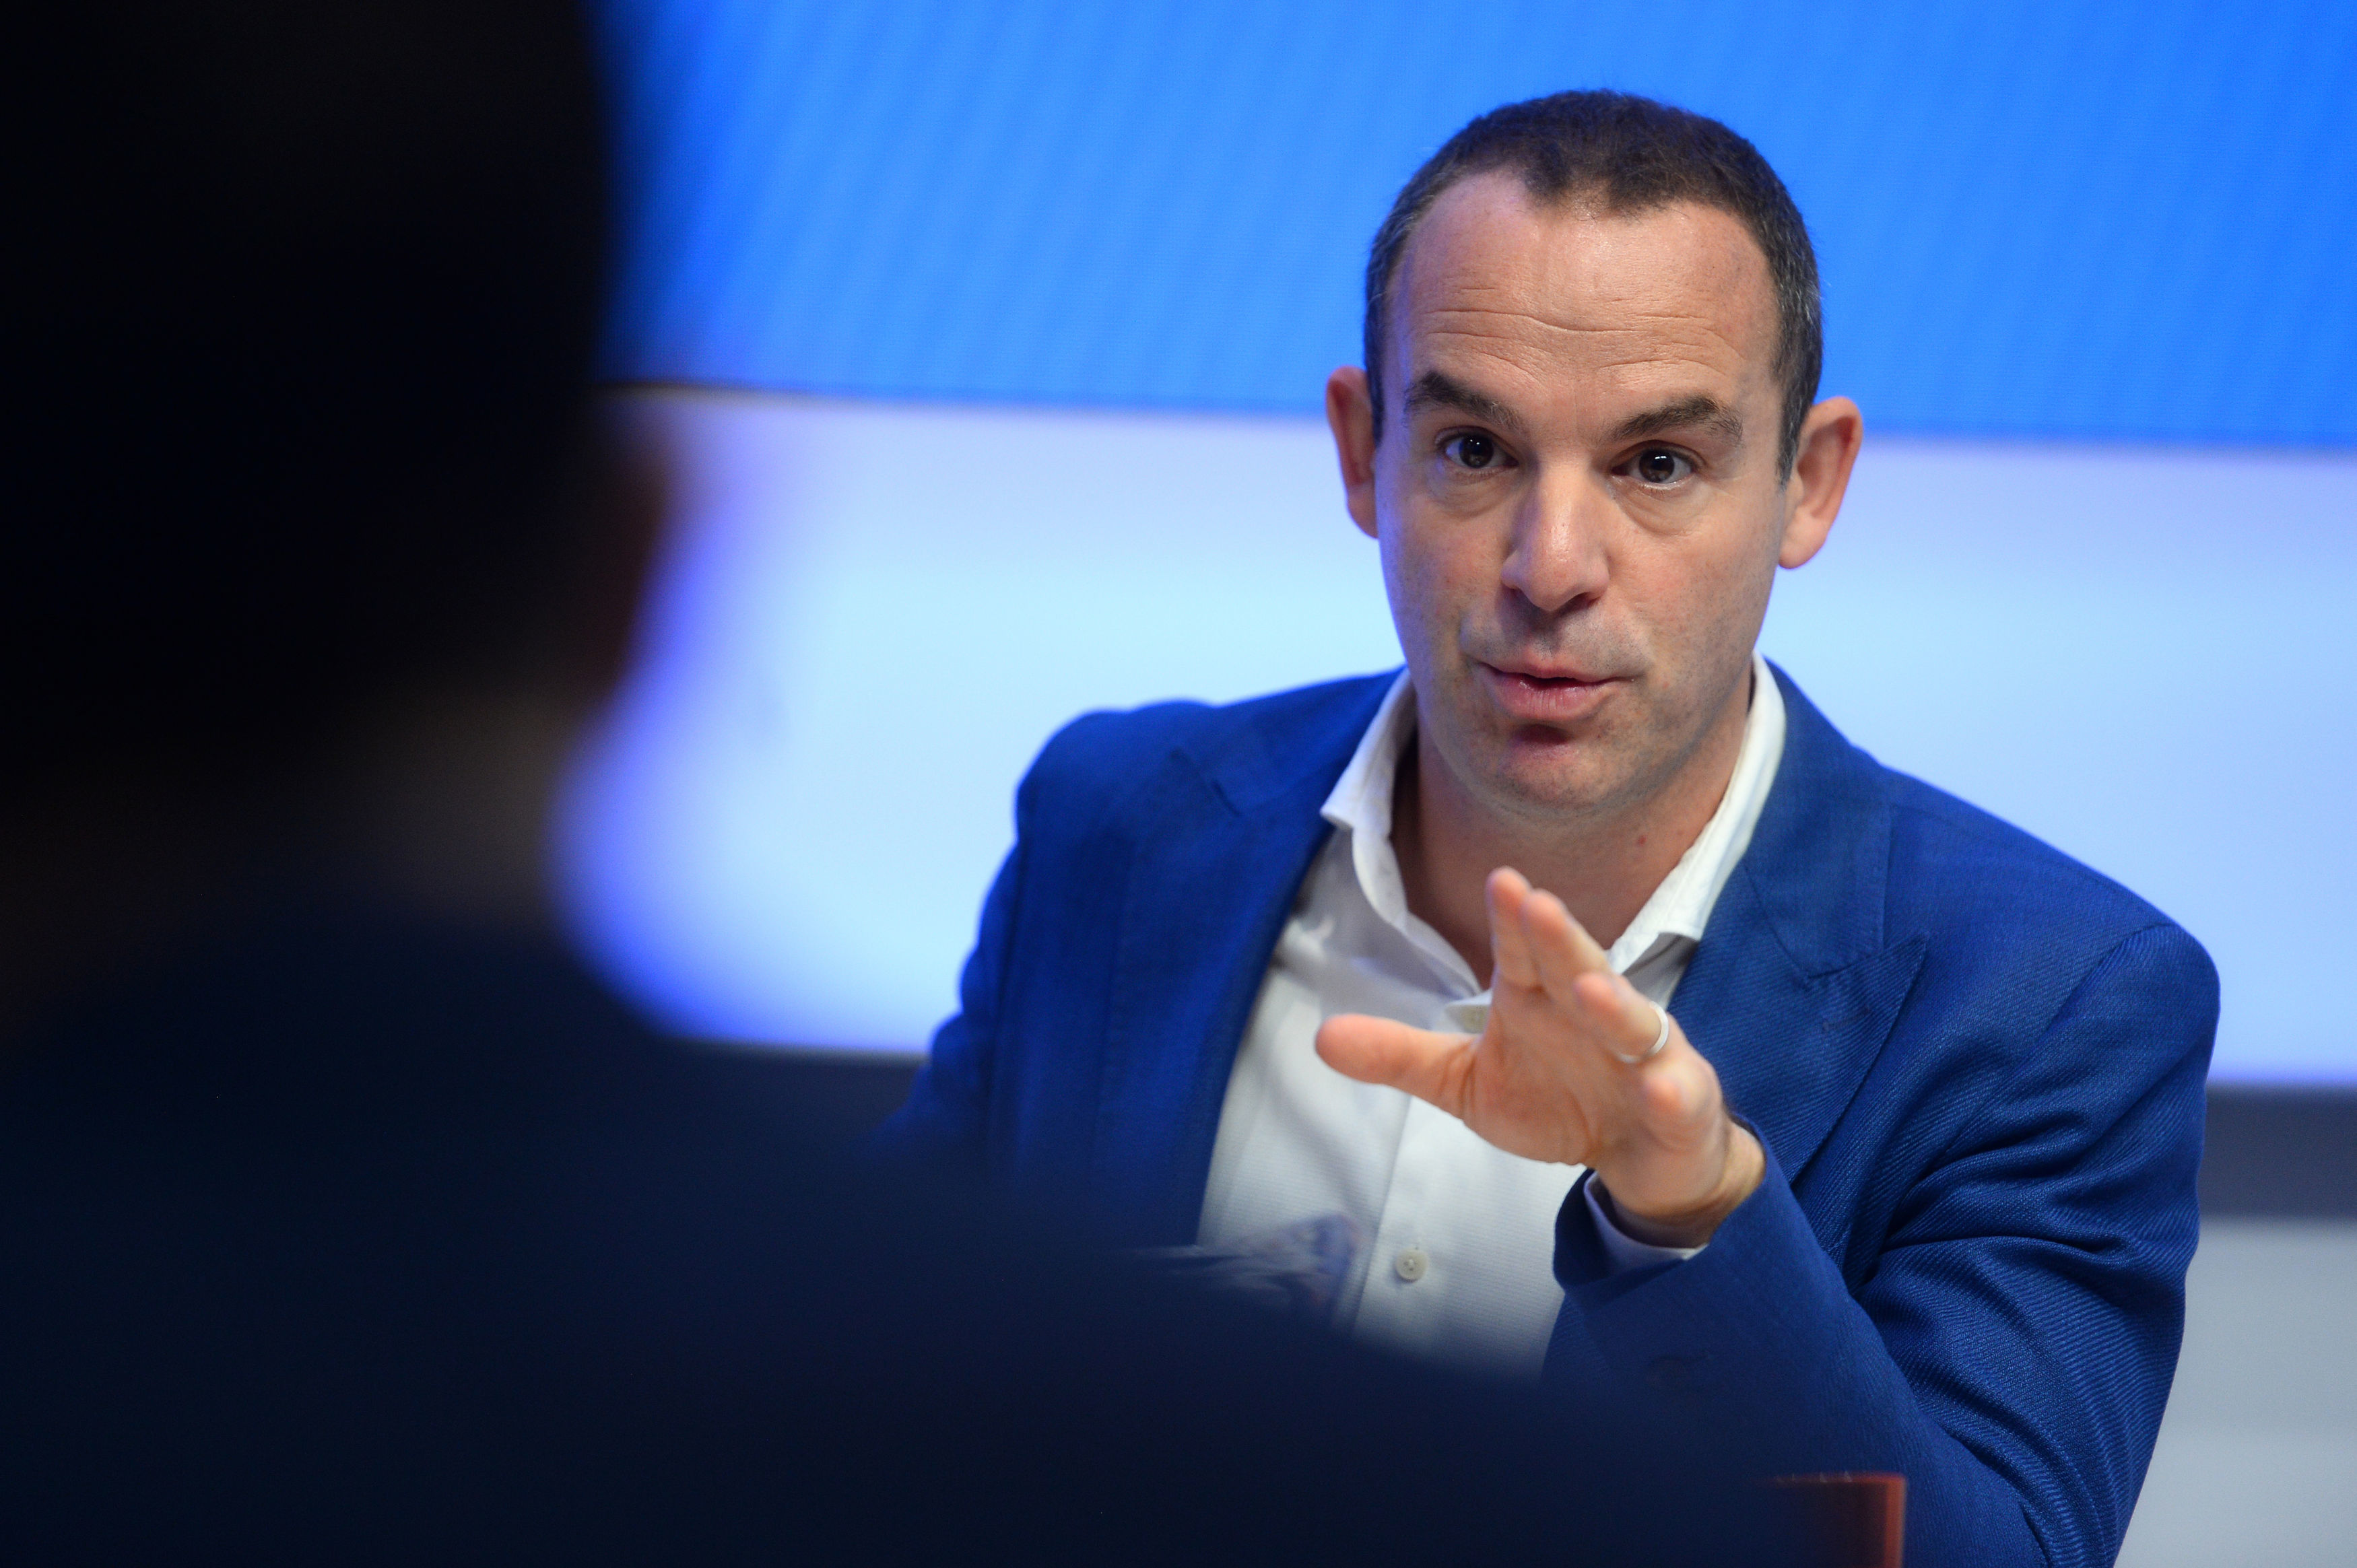 Martin Lewis issues urgent warning to Brits - here's how to stay safe